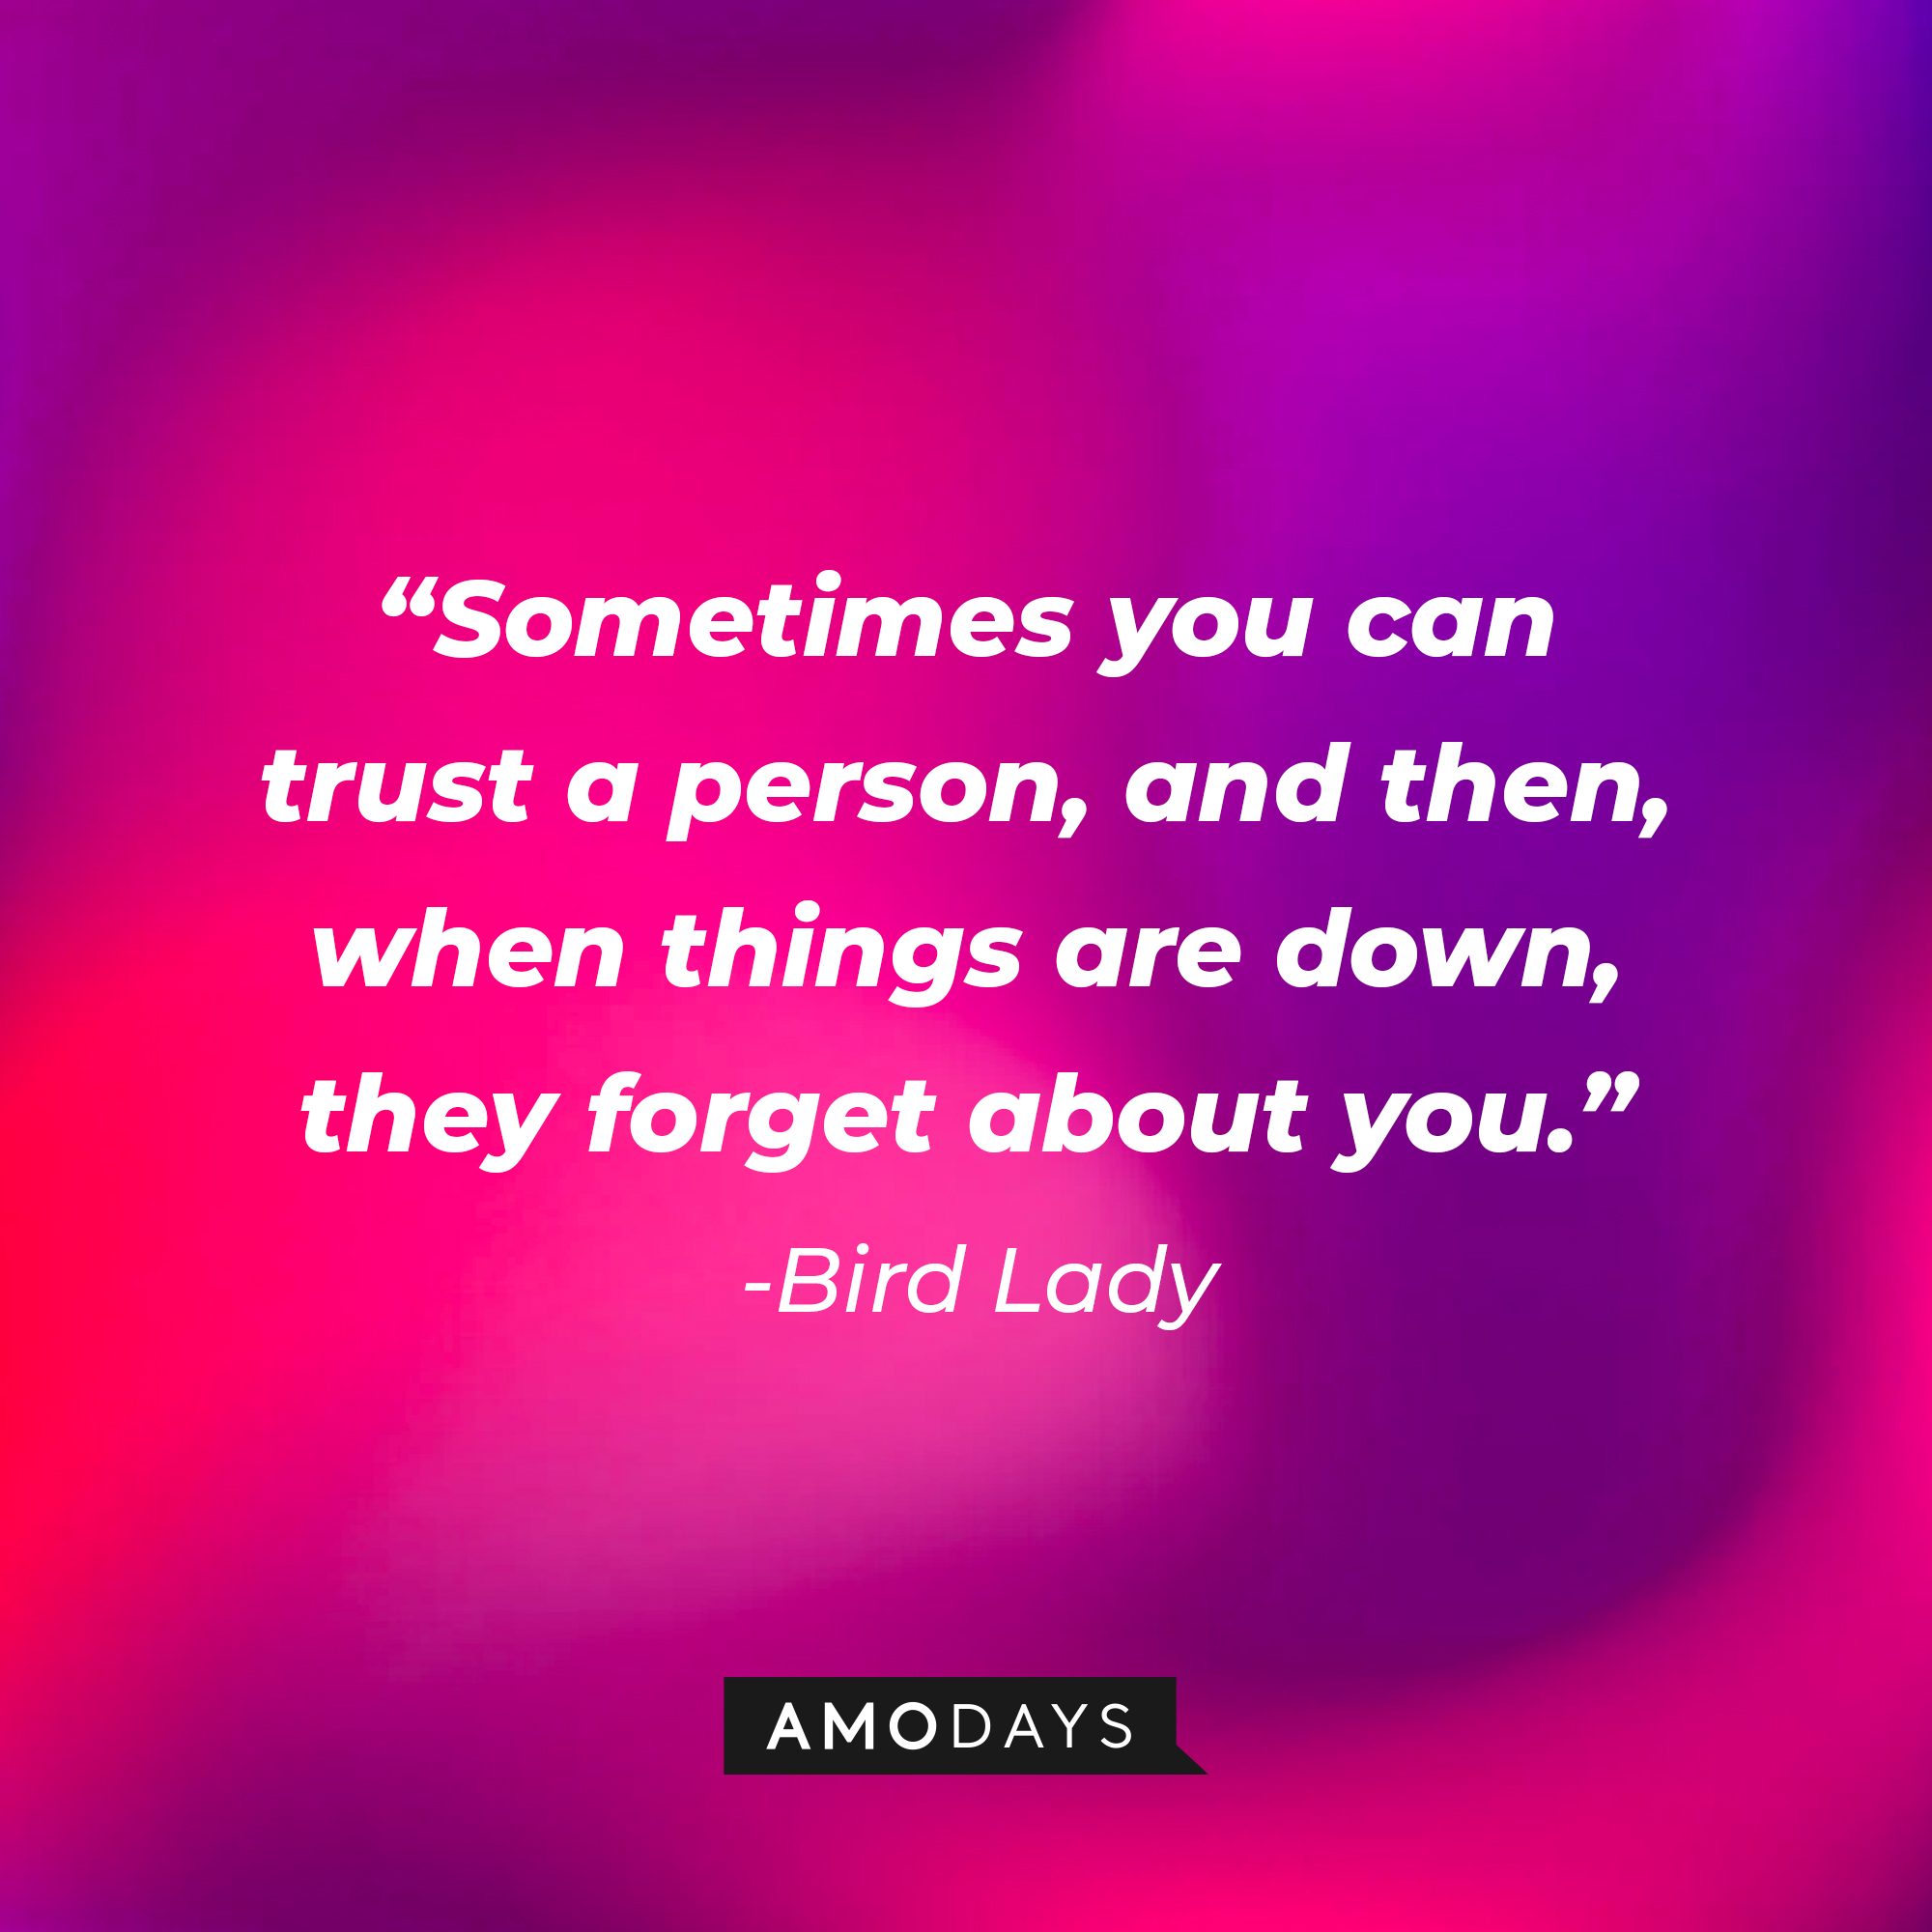 Bird Lady: "Sometimes you can trust a person, and then, when things are down, they forget about you." | Source: AmoDays